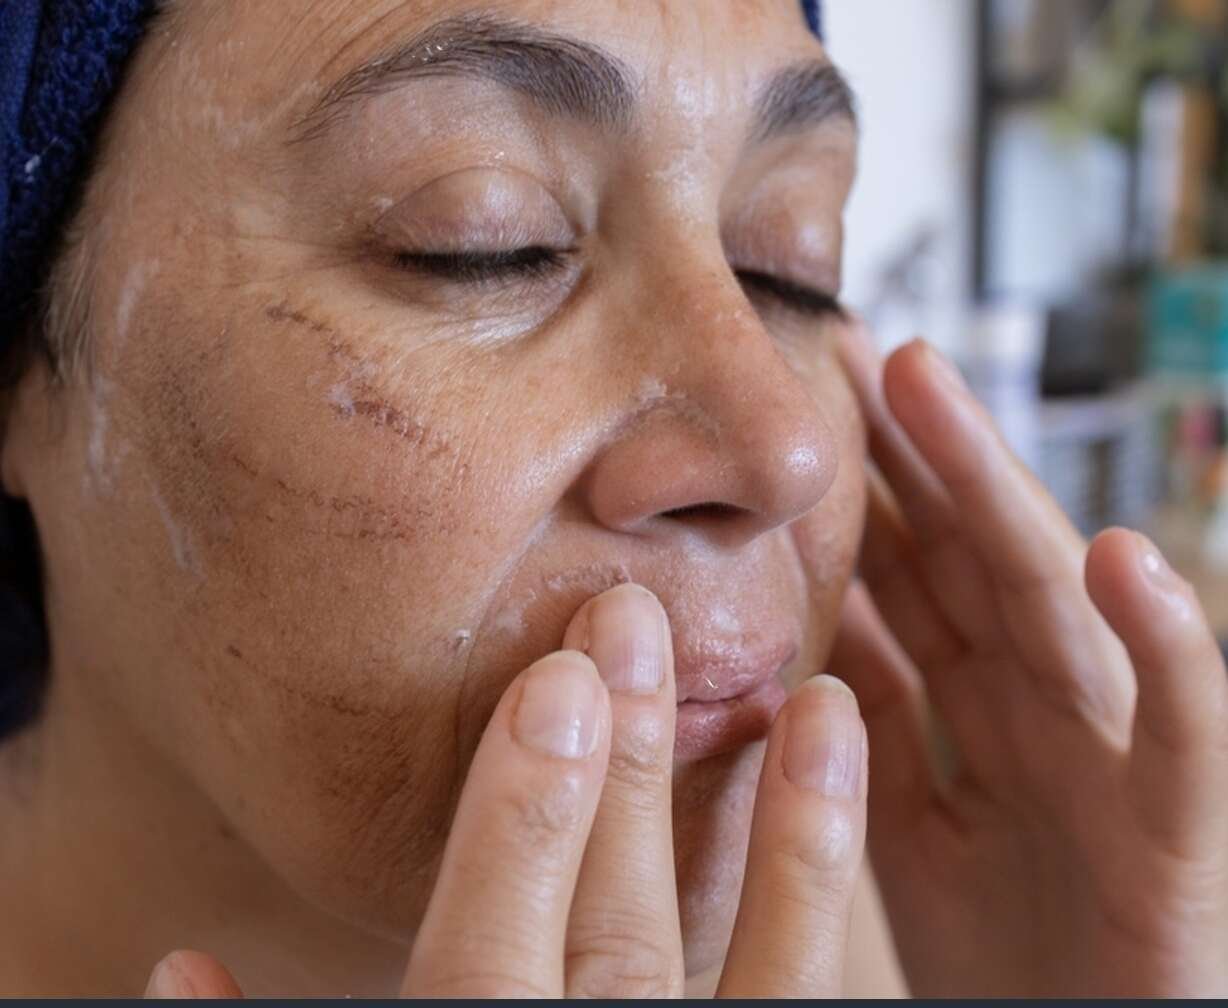 Woman undergoing enzyme peel treatment for radiant skin at a dermatology clinic